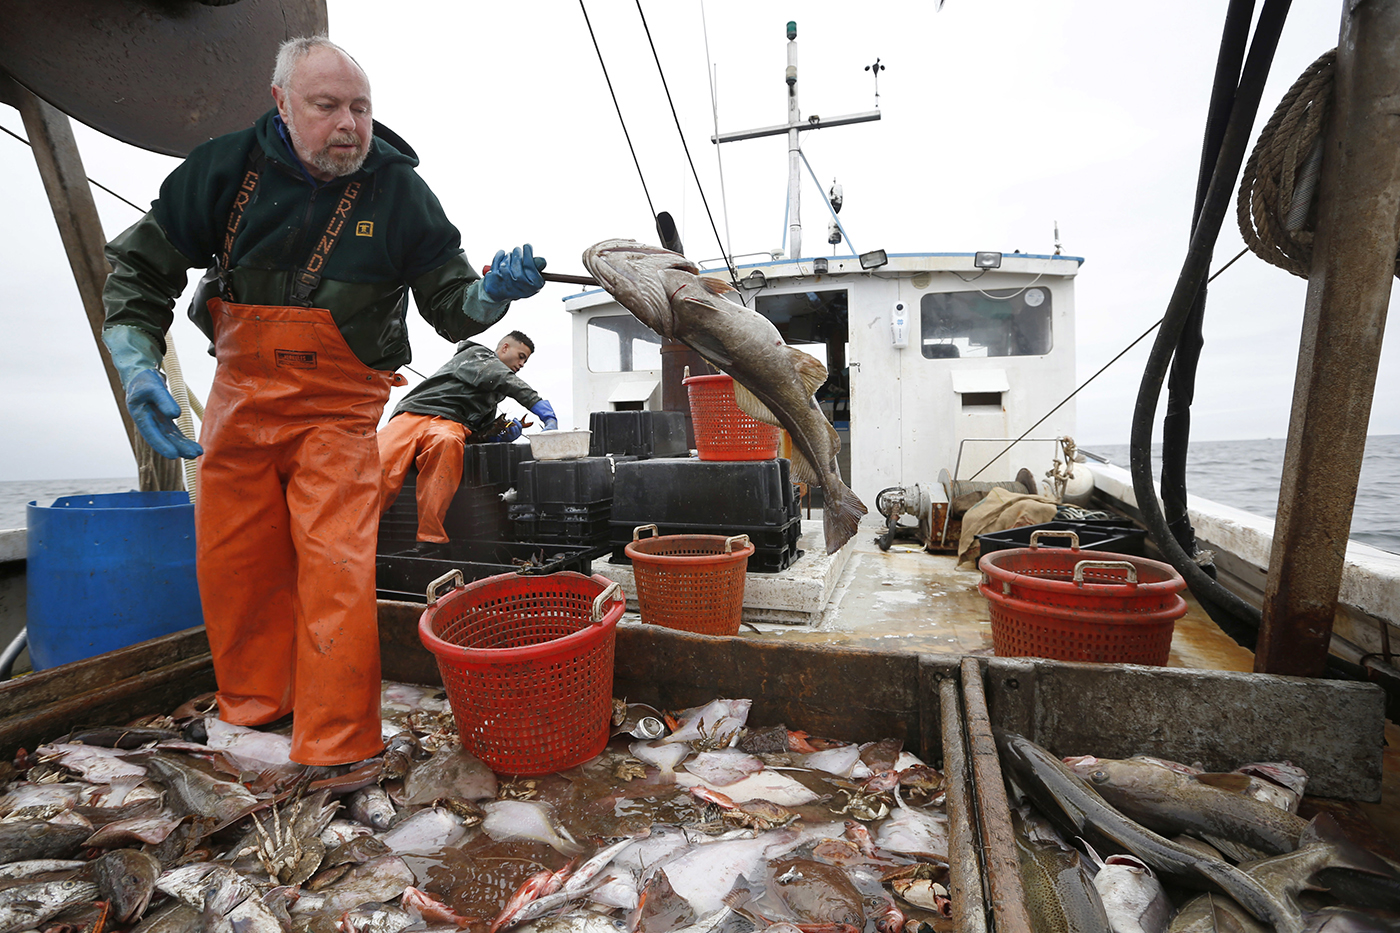 The plight of the commercial fishermen